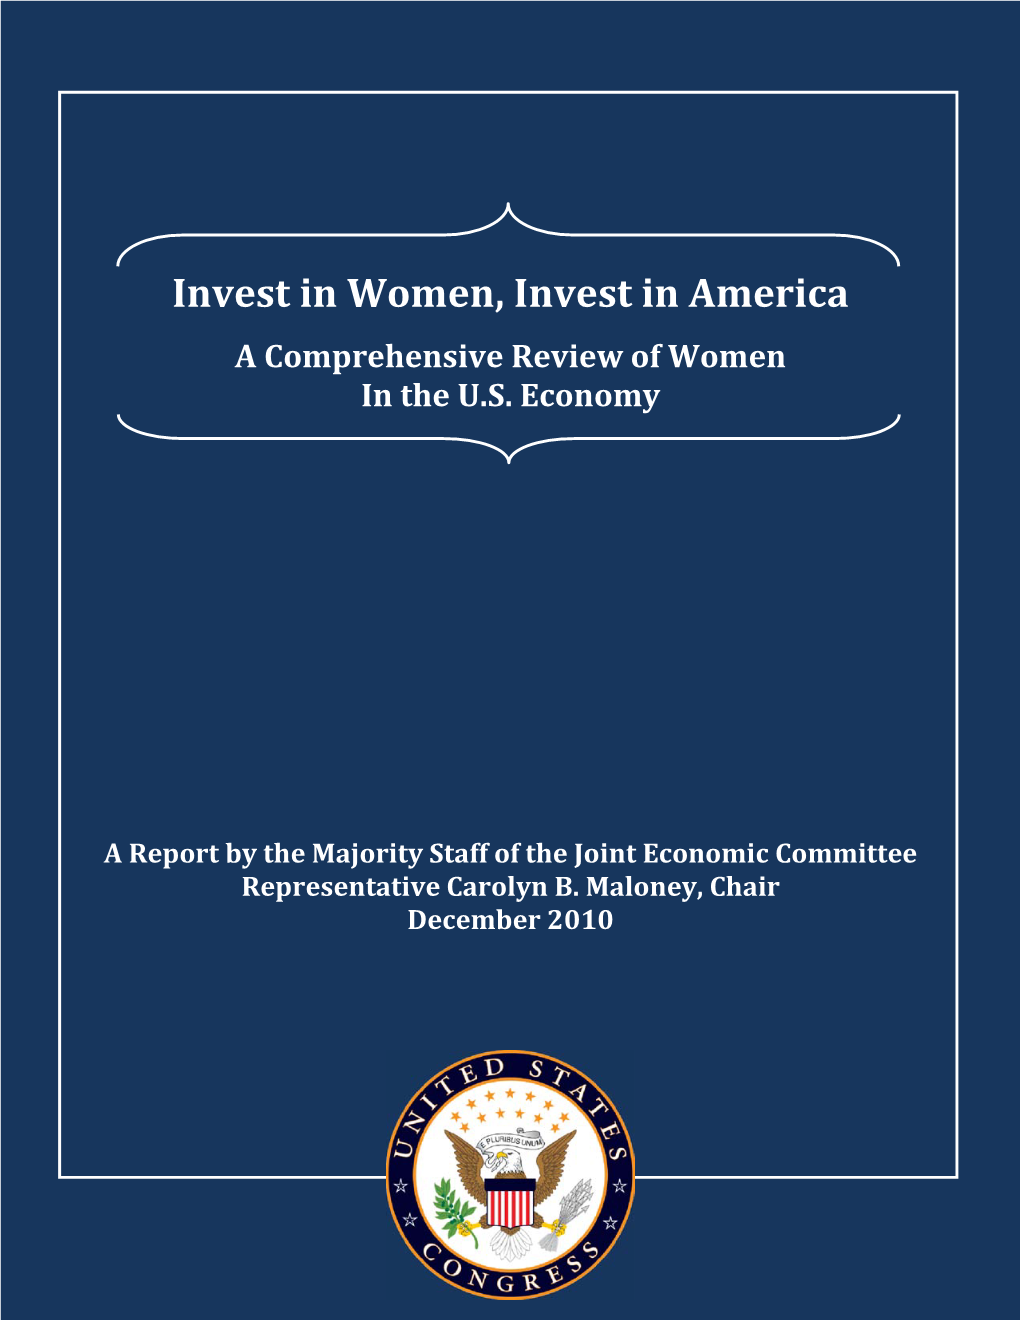 Invest in Women, Invest in America: a Comprehensive Review of Women in the U.S